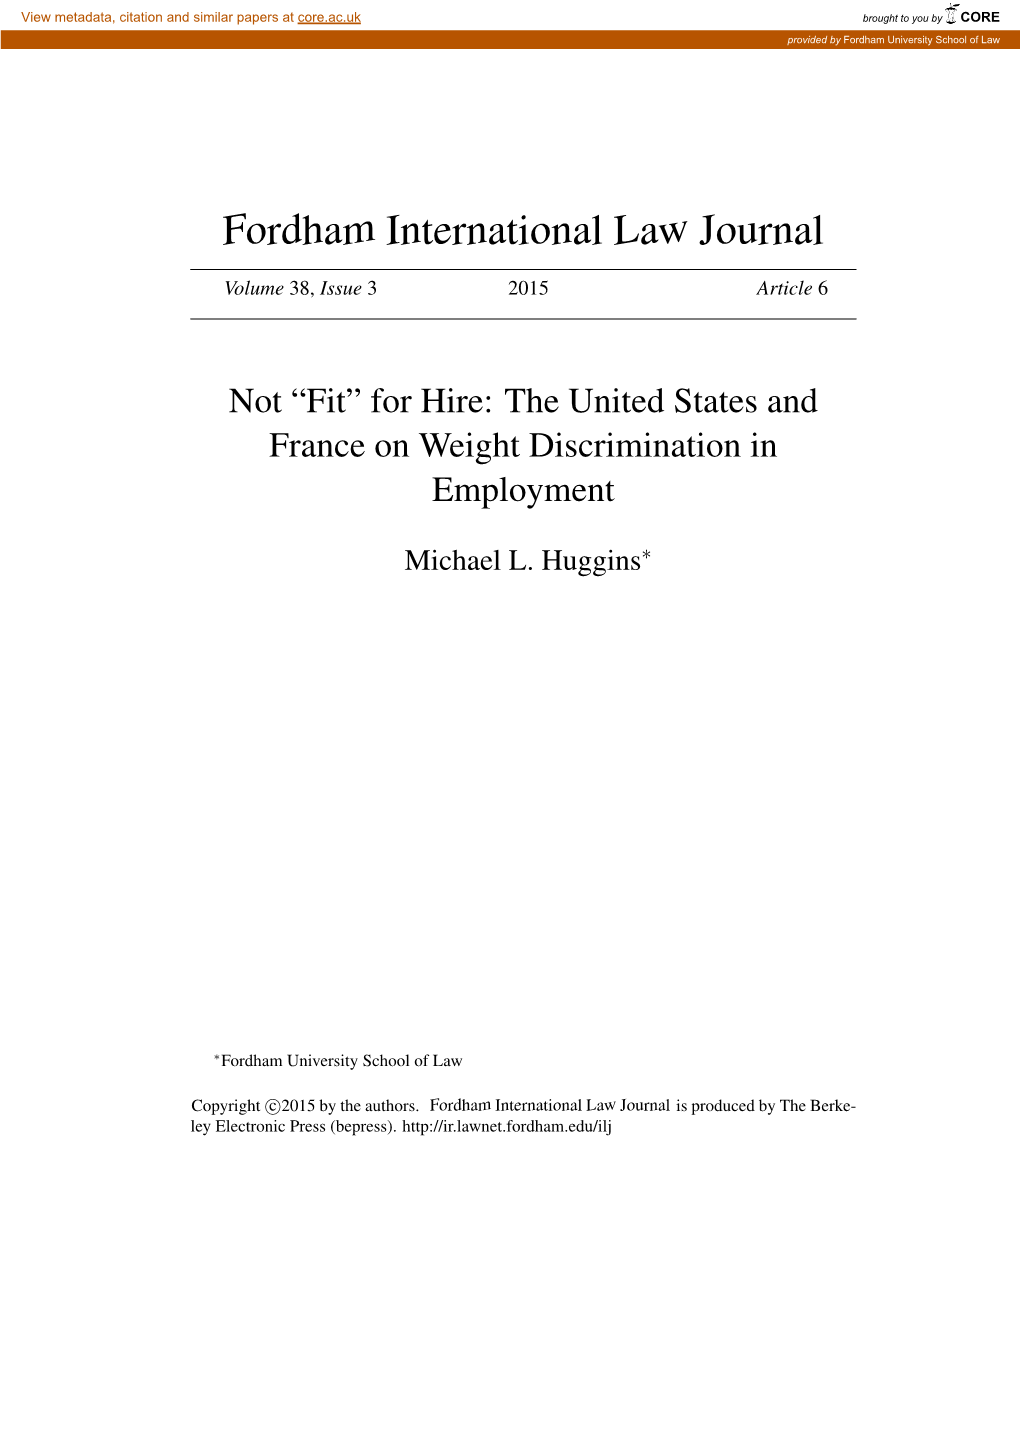 Not "Fit" for Hire: the United States and France on Weight Discrimination in Employment